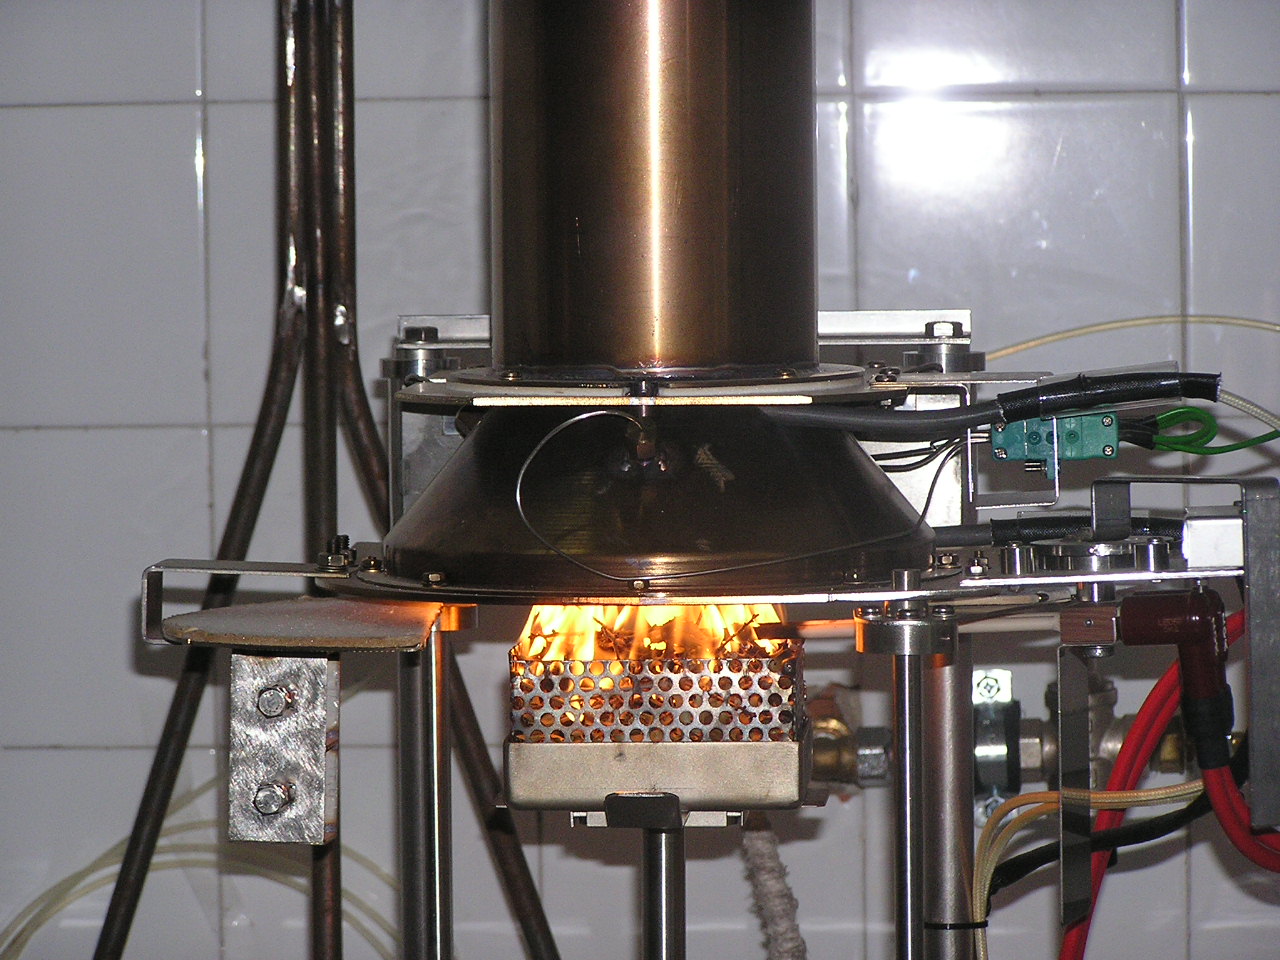 Mass loss calorimeter, for the study the flammability of forest fuel and bark and soil heating